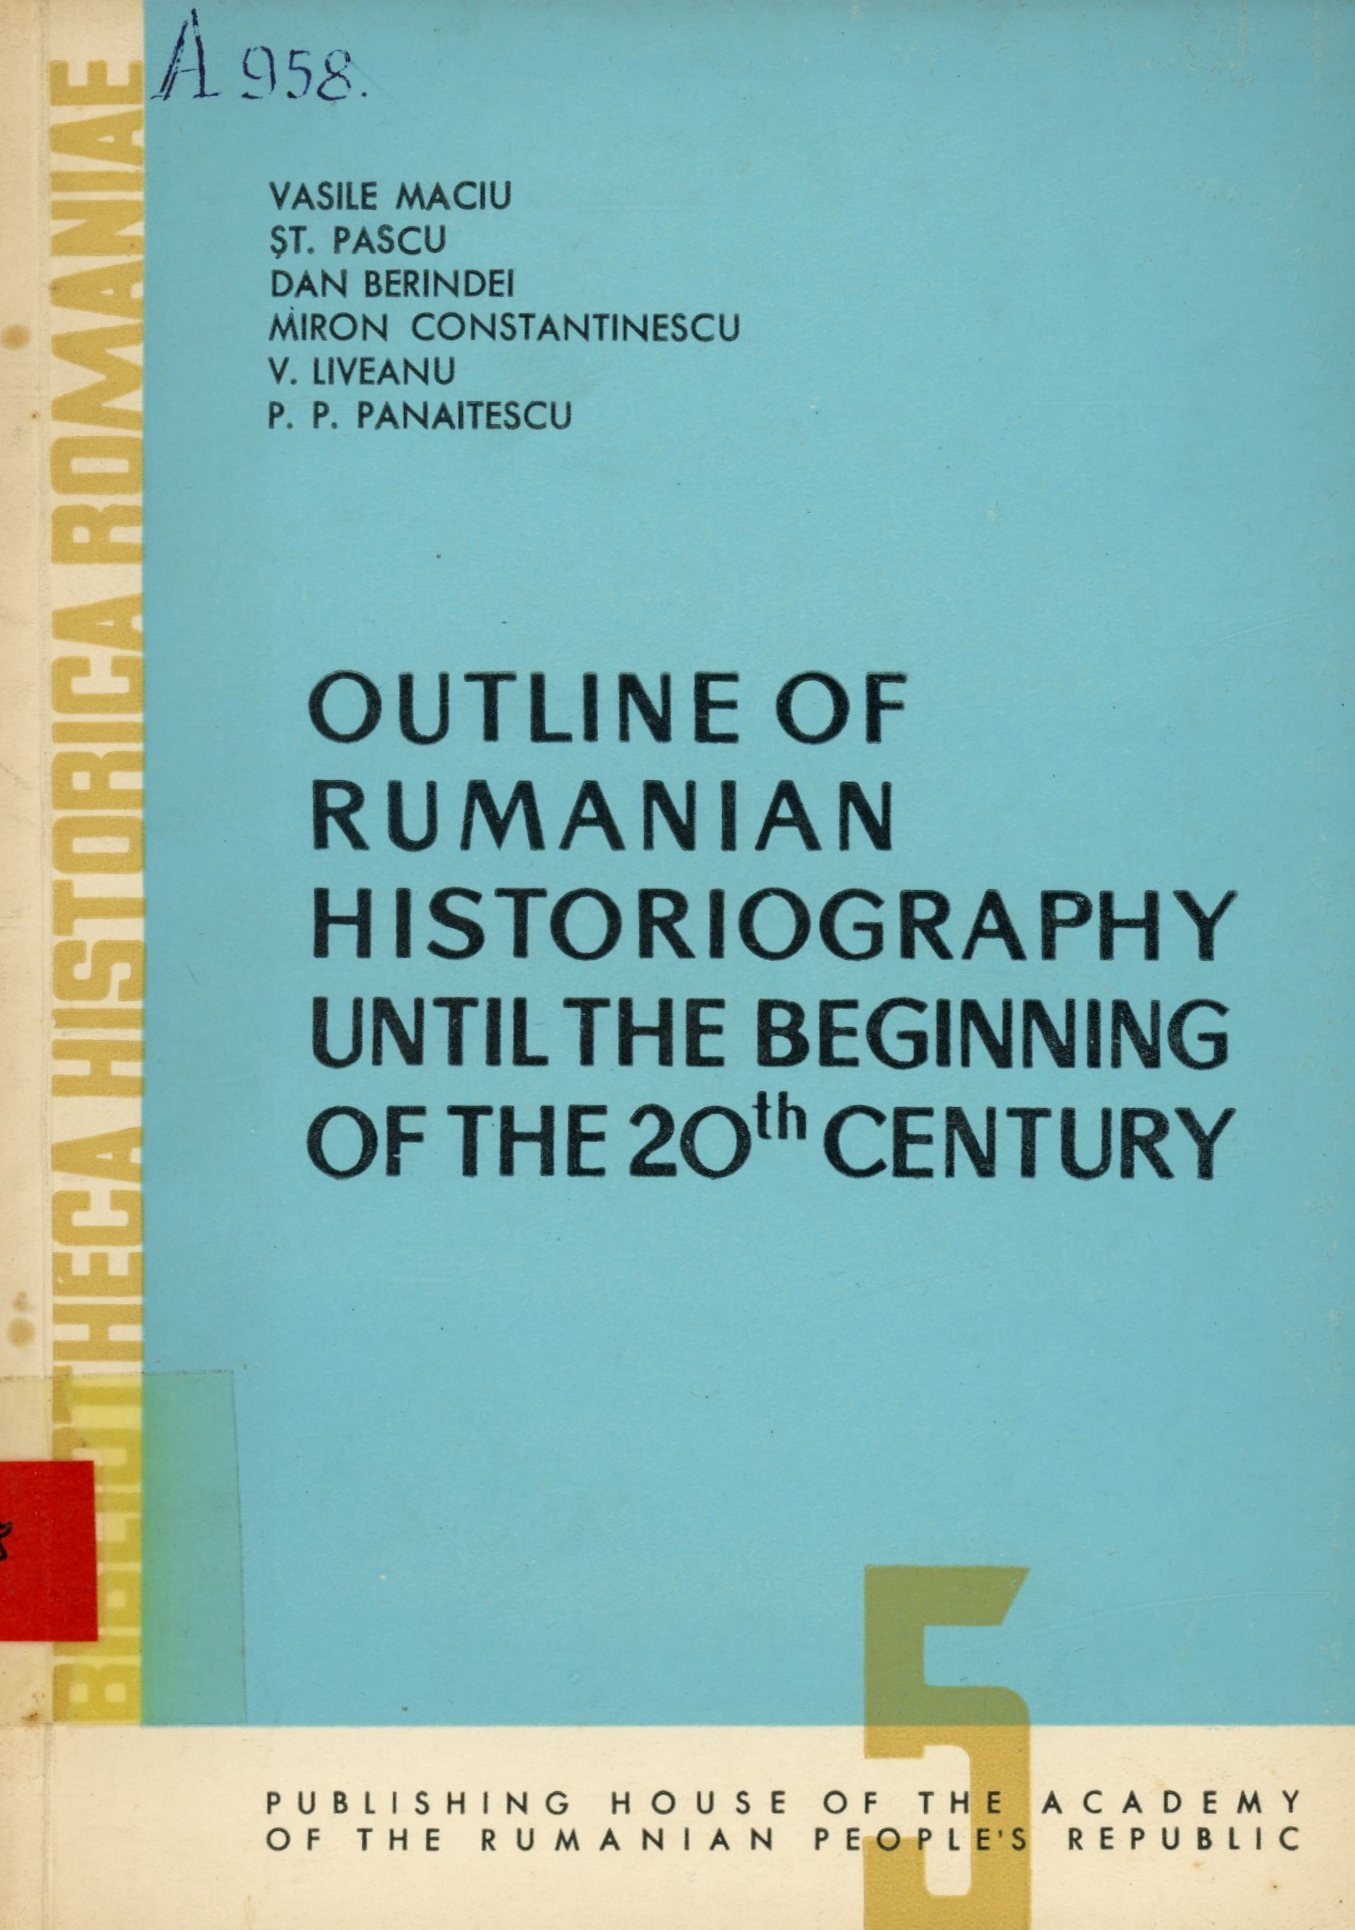 Outline of Rumanian Historiography Until the Beginning of the 20th Century (Erkel Ferenc Területi Múzeum, Gyula CC BY-NC-SA)